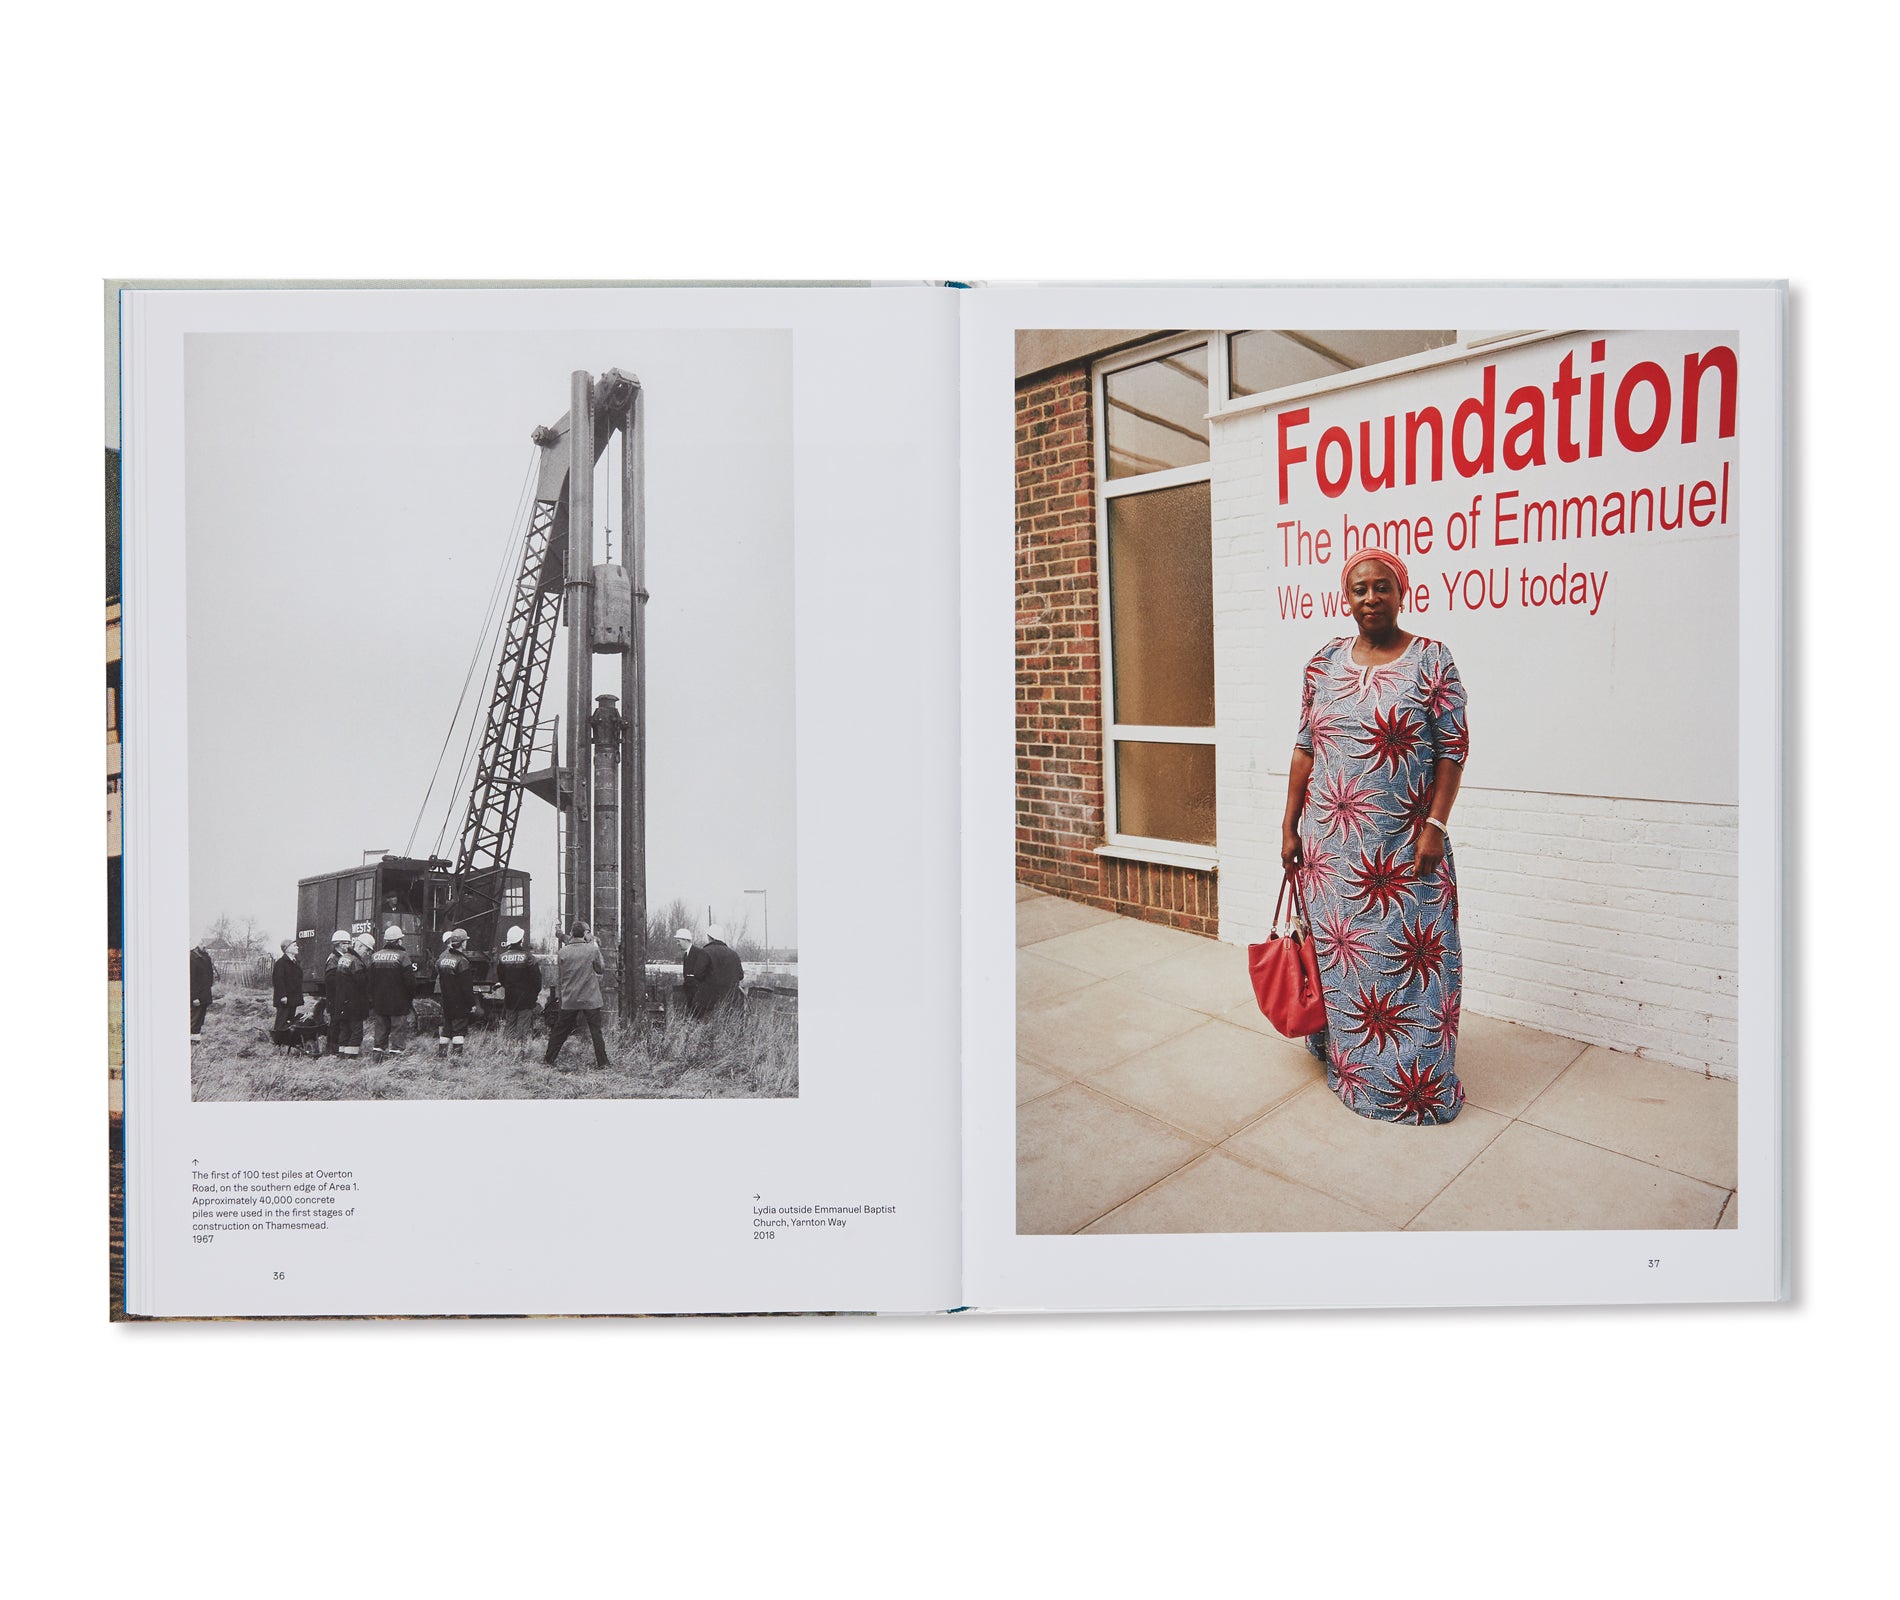 THE TOWN OF TOMORROW 50 YEARS OF THAMESMEAD by Peter Chadwick, Ben Weaver, Tara Darby, John Grindrod